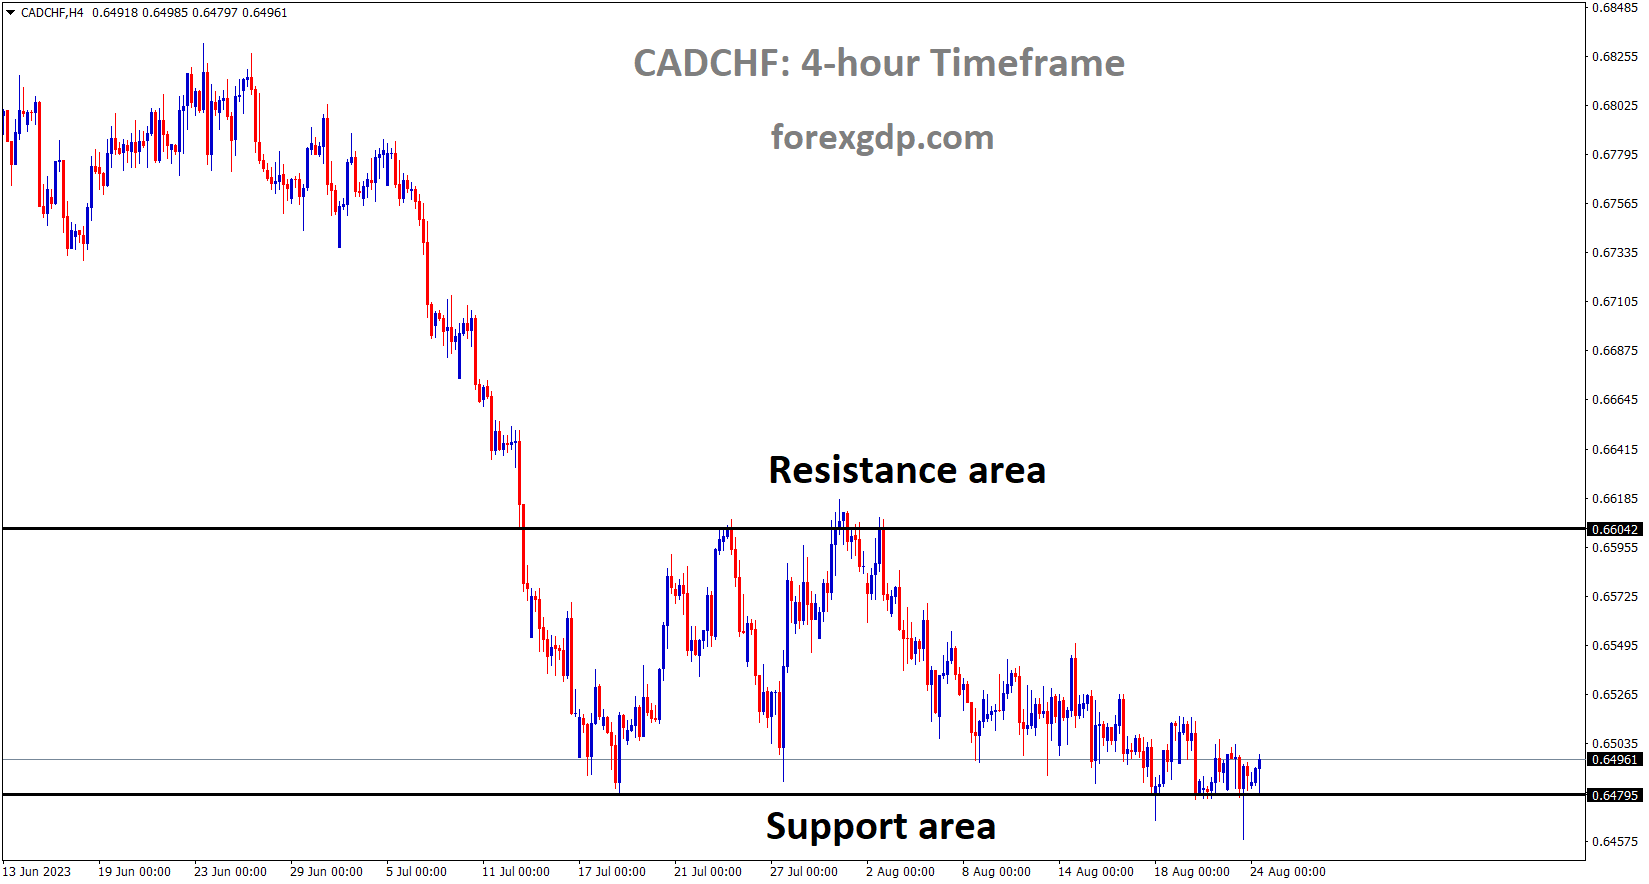 CADCHF is moving in the Box pattern and the market has rebounded from the Horizontal support area of the pattern